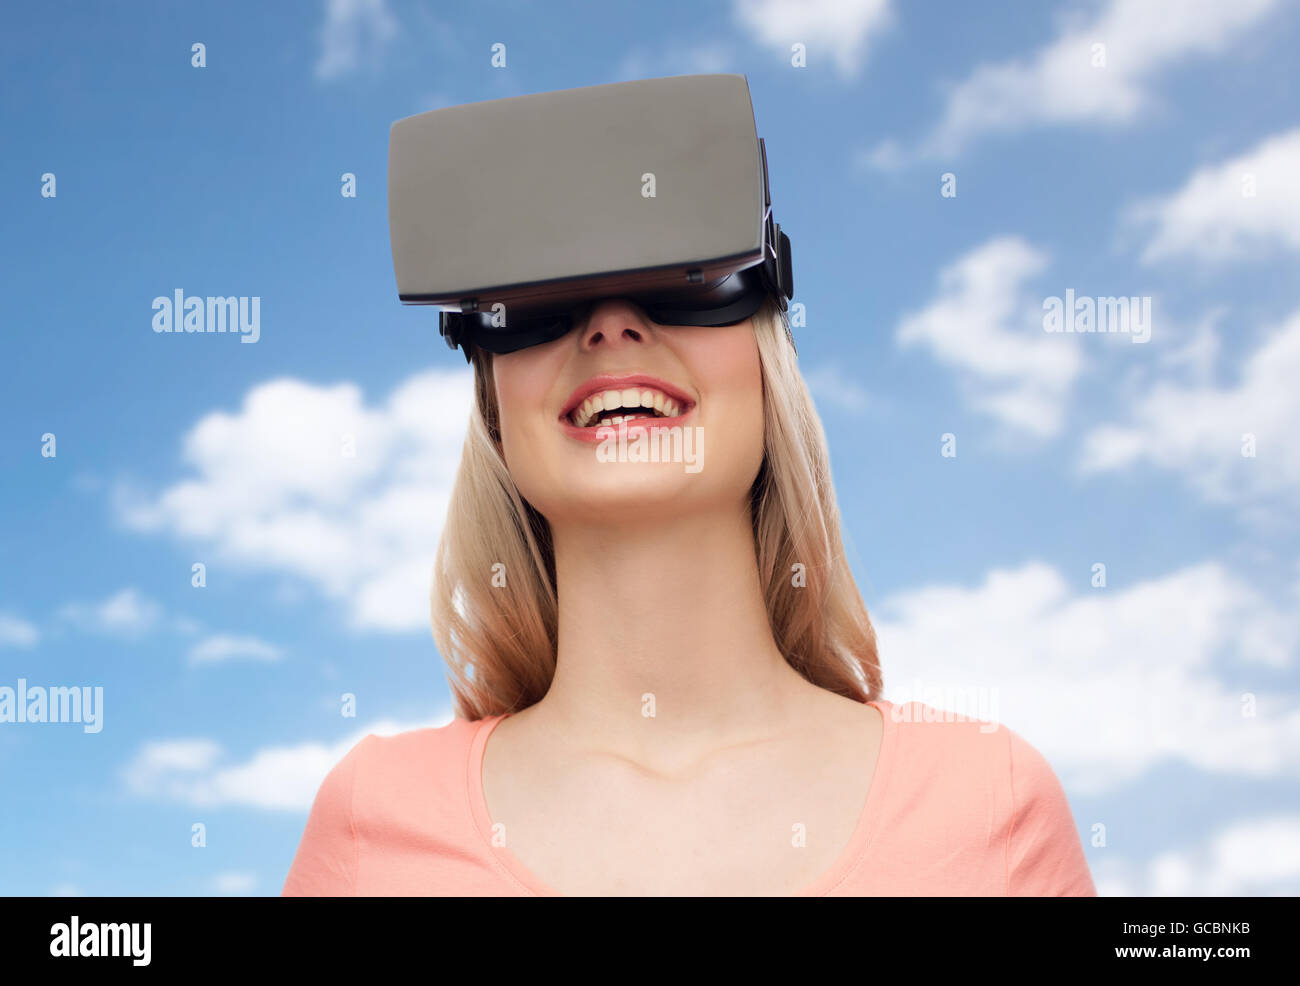 woman in virtual reality headset or 3d glasses Stock Photo